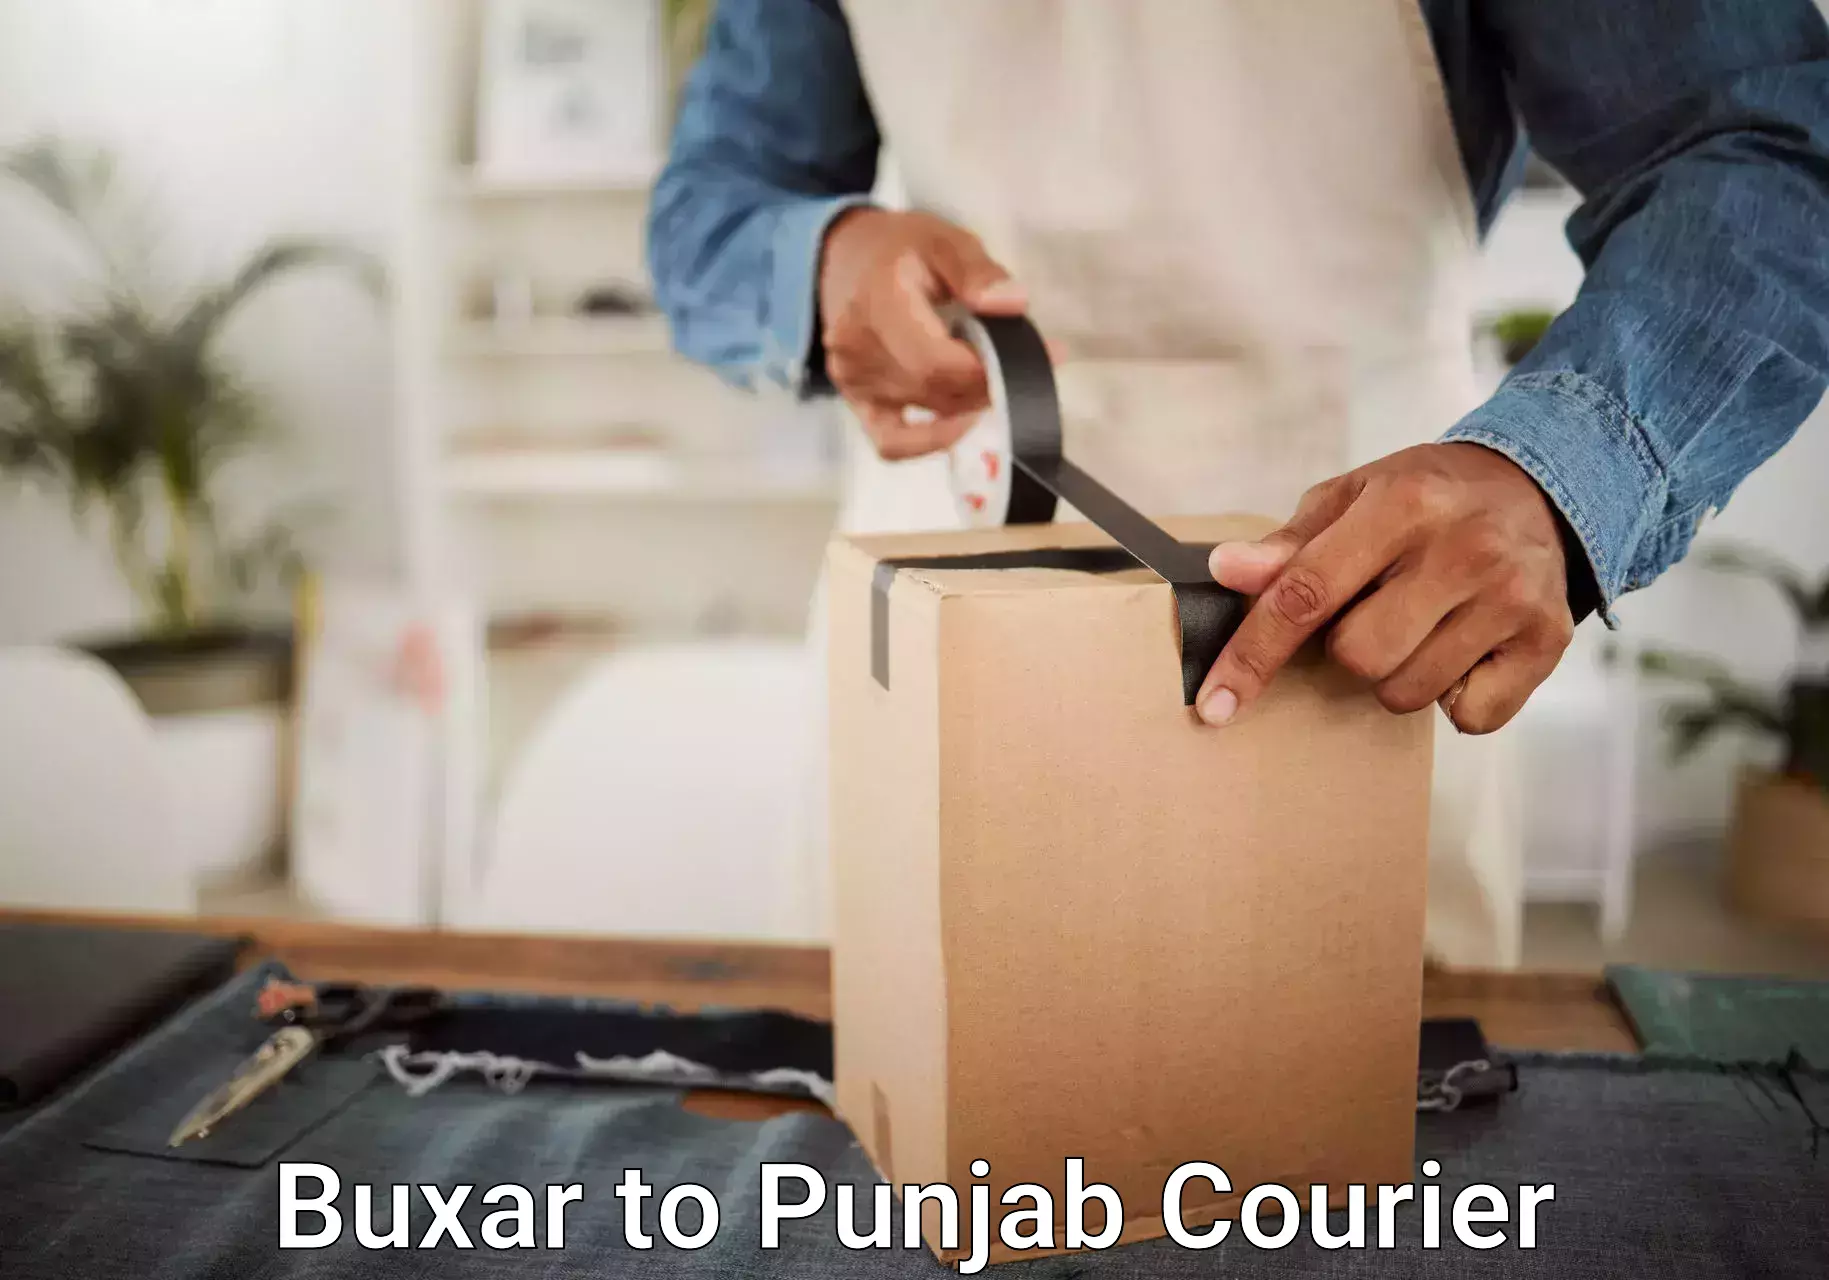 Luggage delivery app Buxar to Punjab